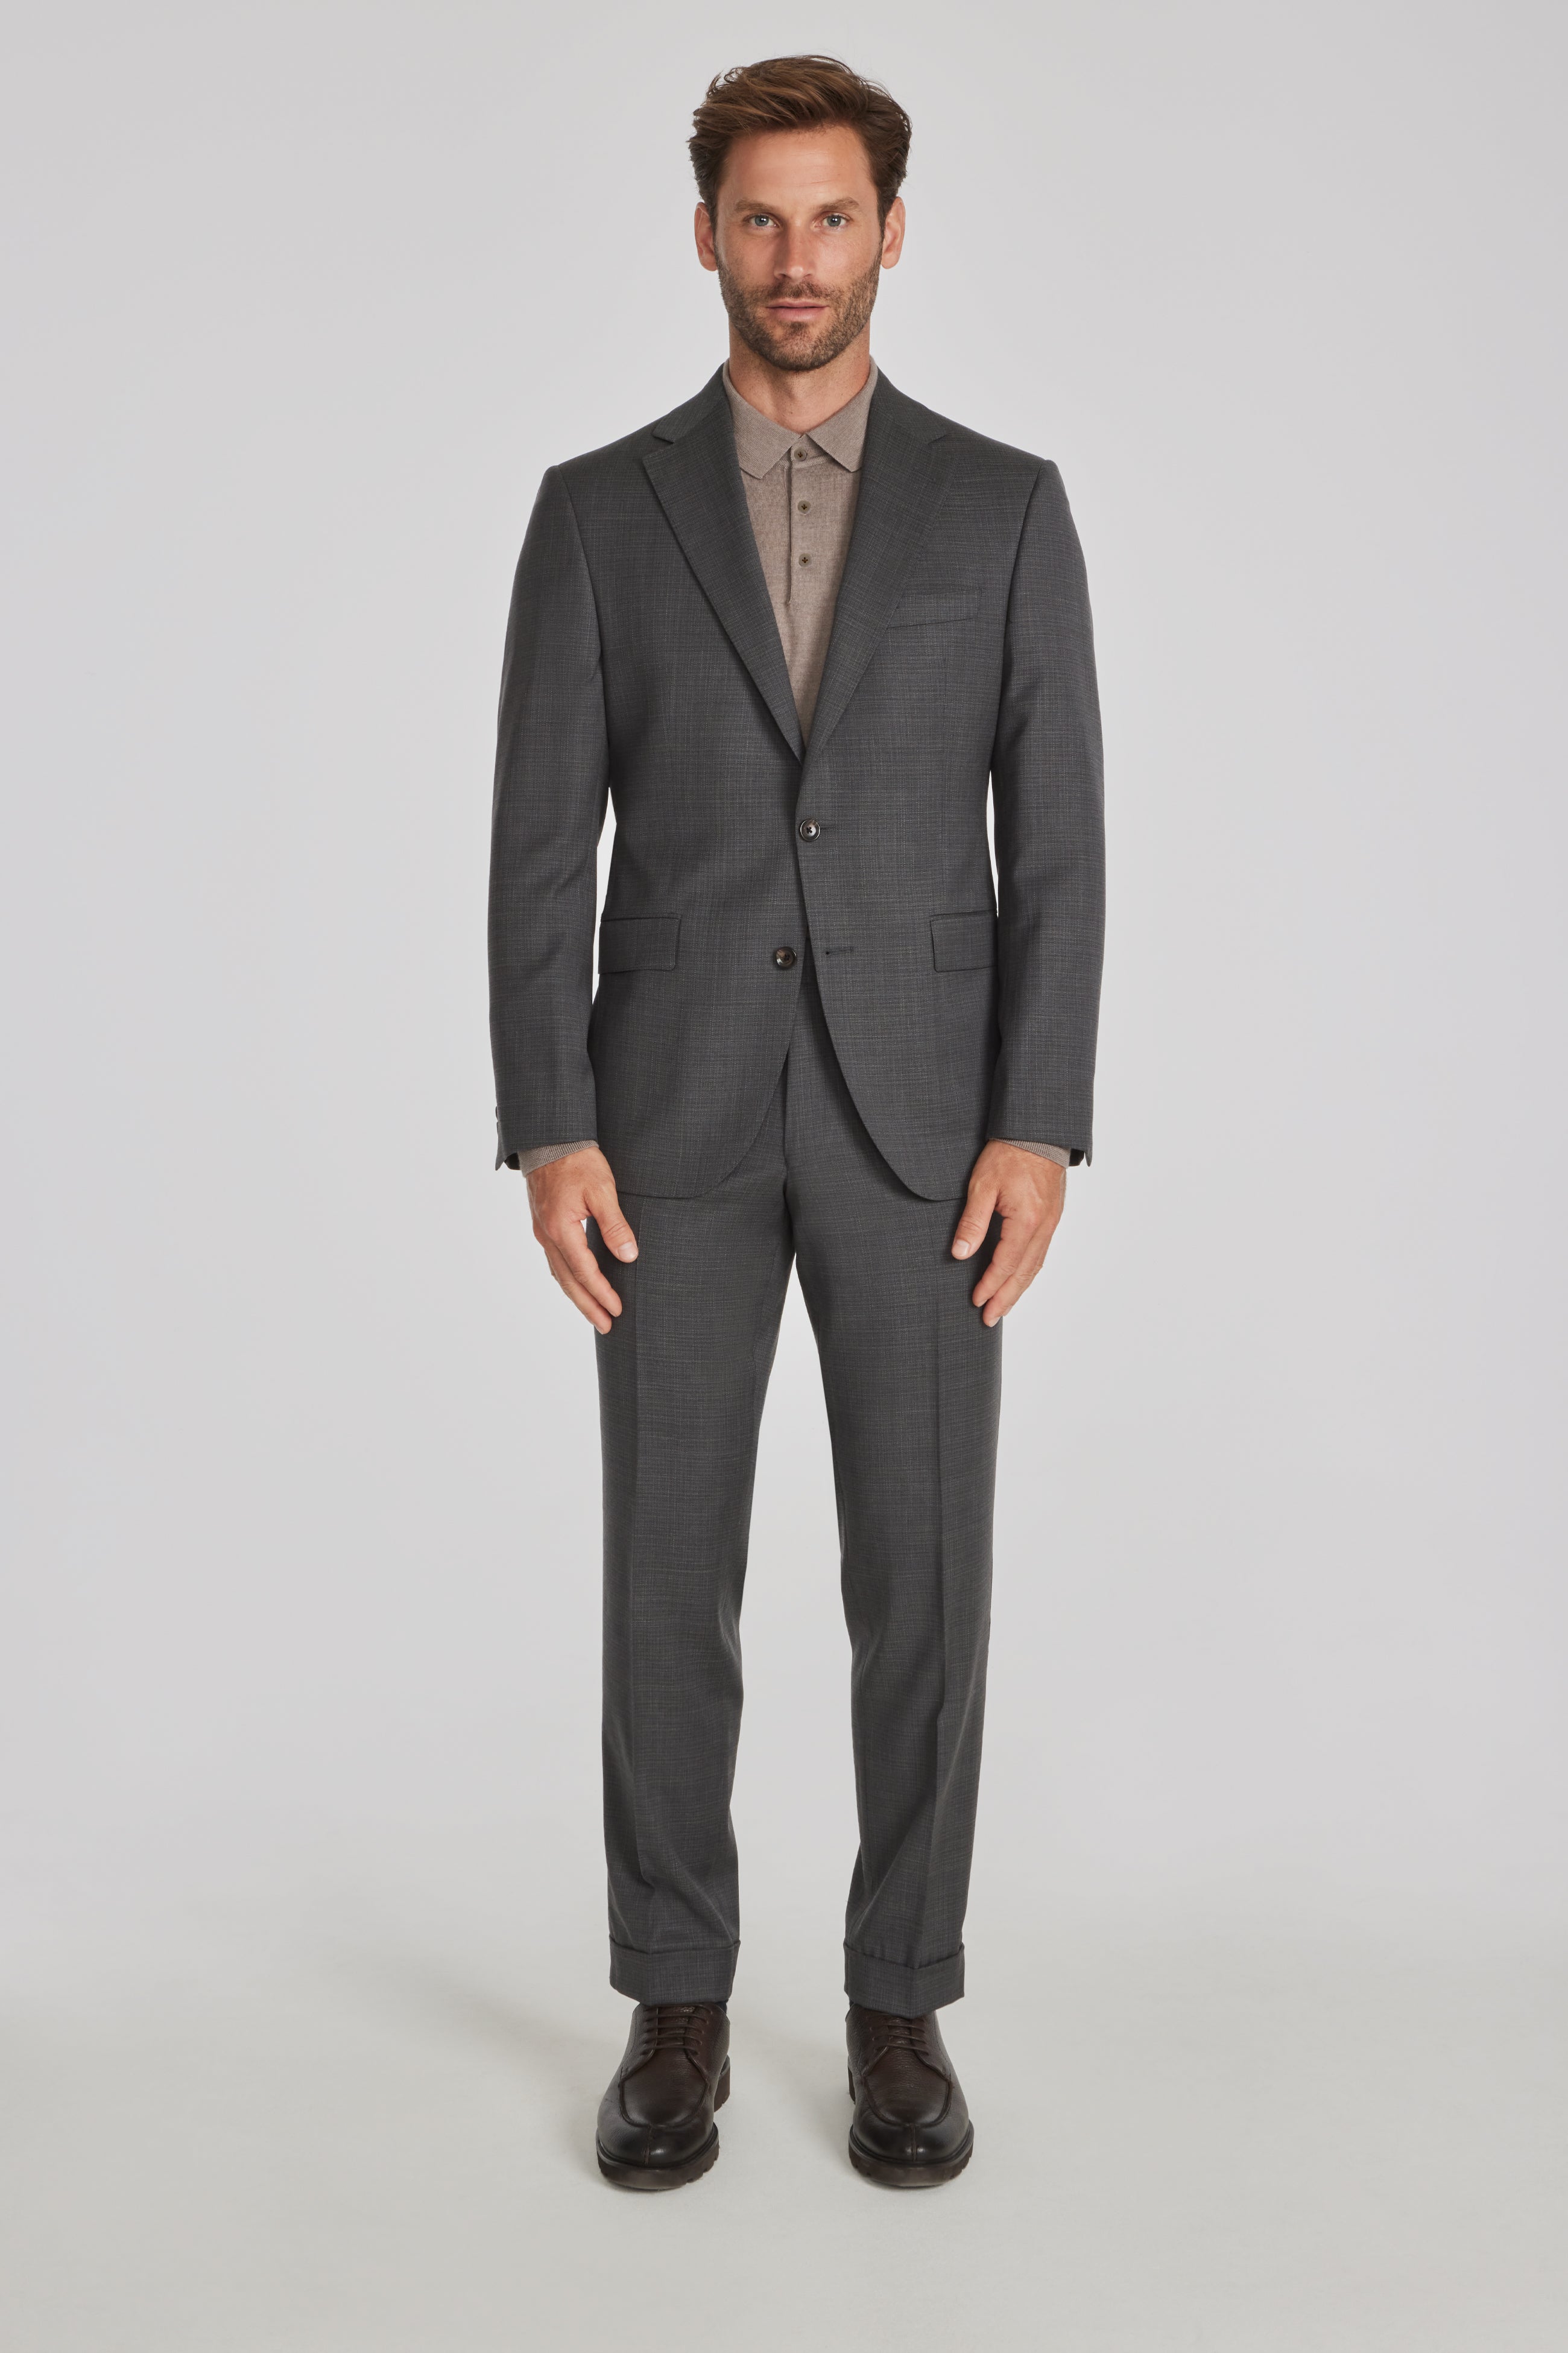 Alt view Esprit Micro Pattern Super 120's Wool Stretch Suit in Charcoal